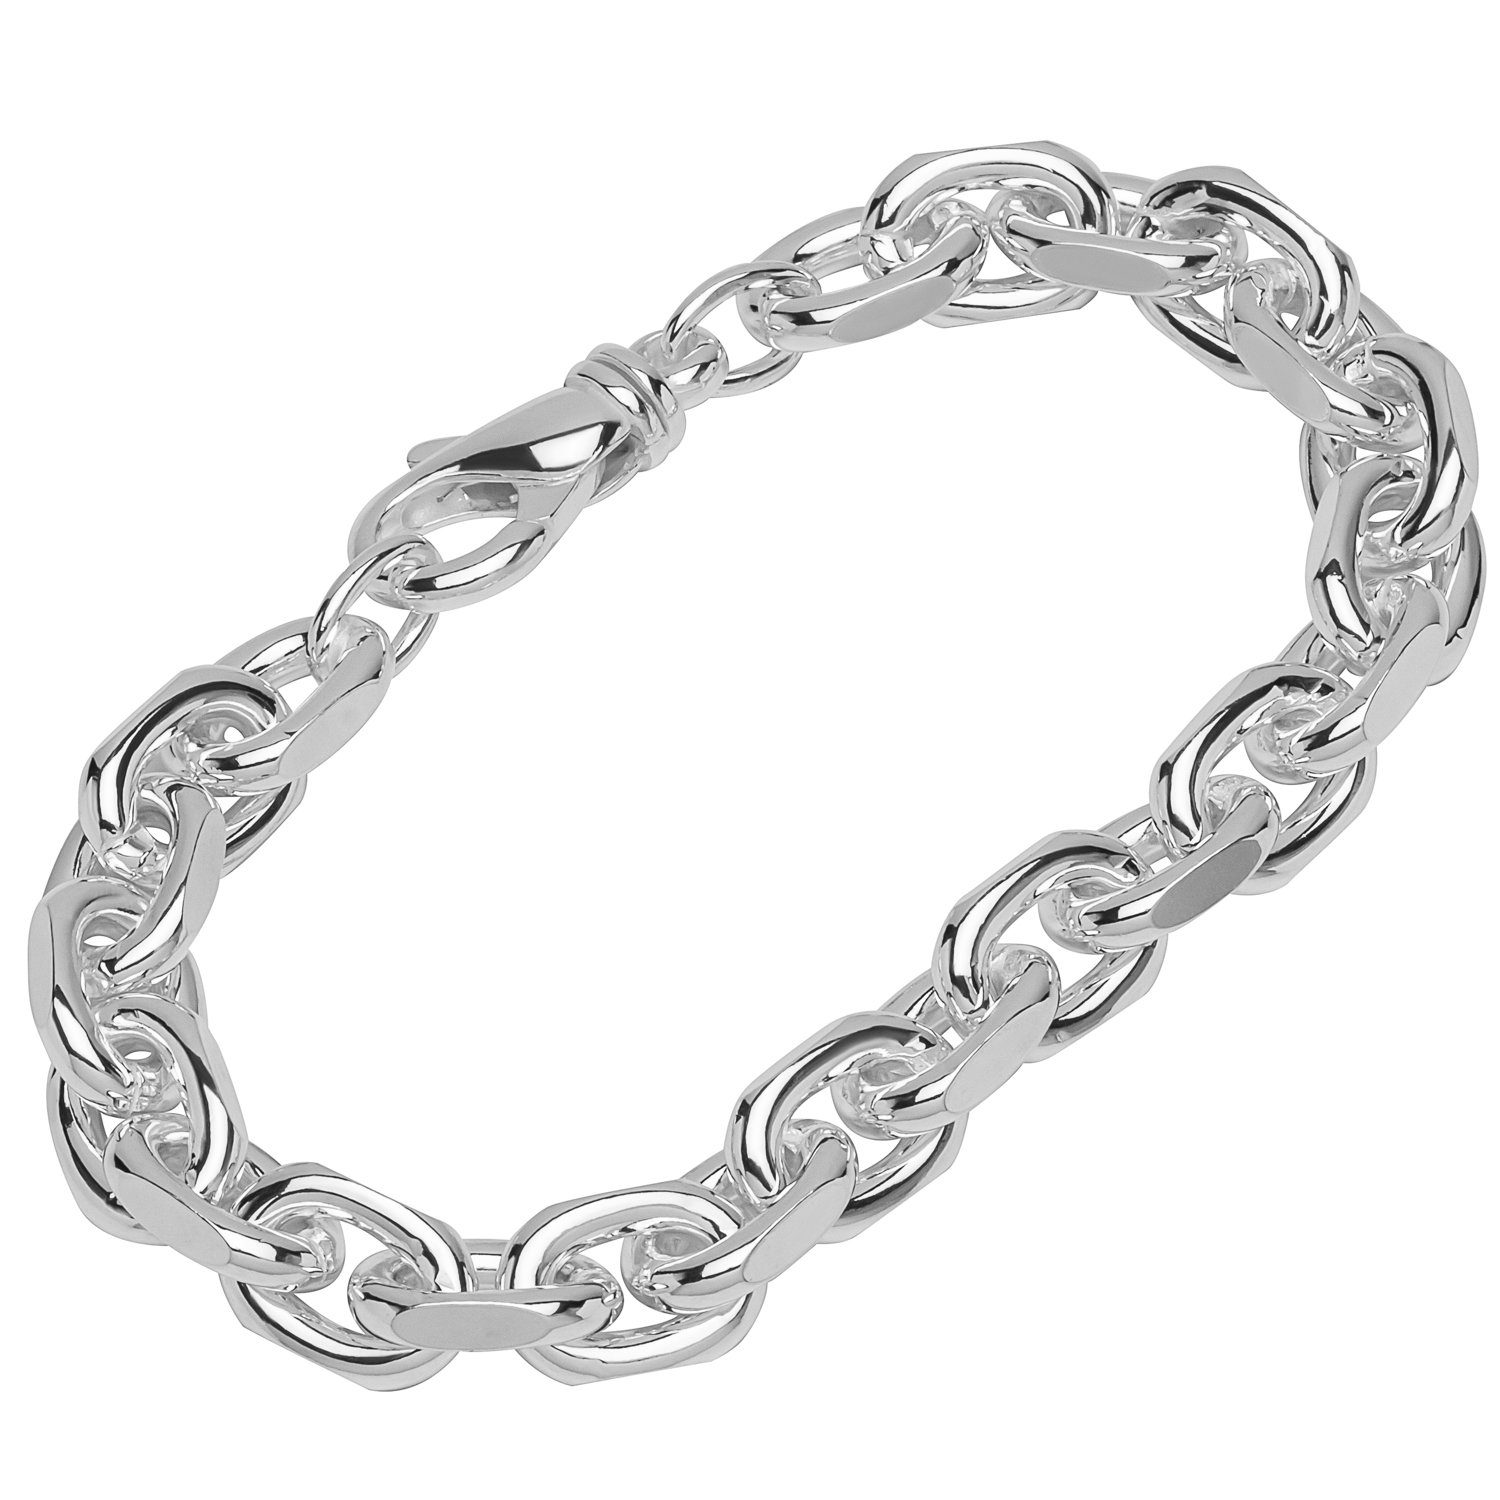 Germany Ankerkette Silber Sterling Stück), in Silberarmband (1 NKlaus Made 22cm seitli 925 Armband